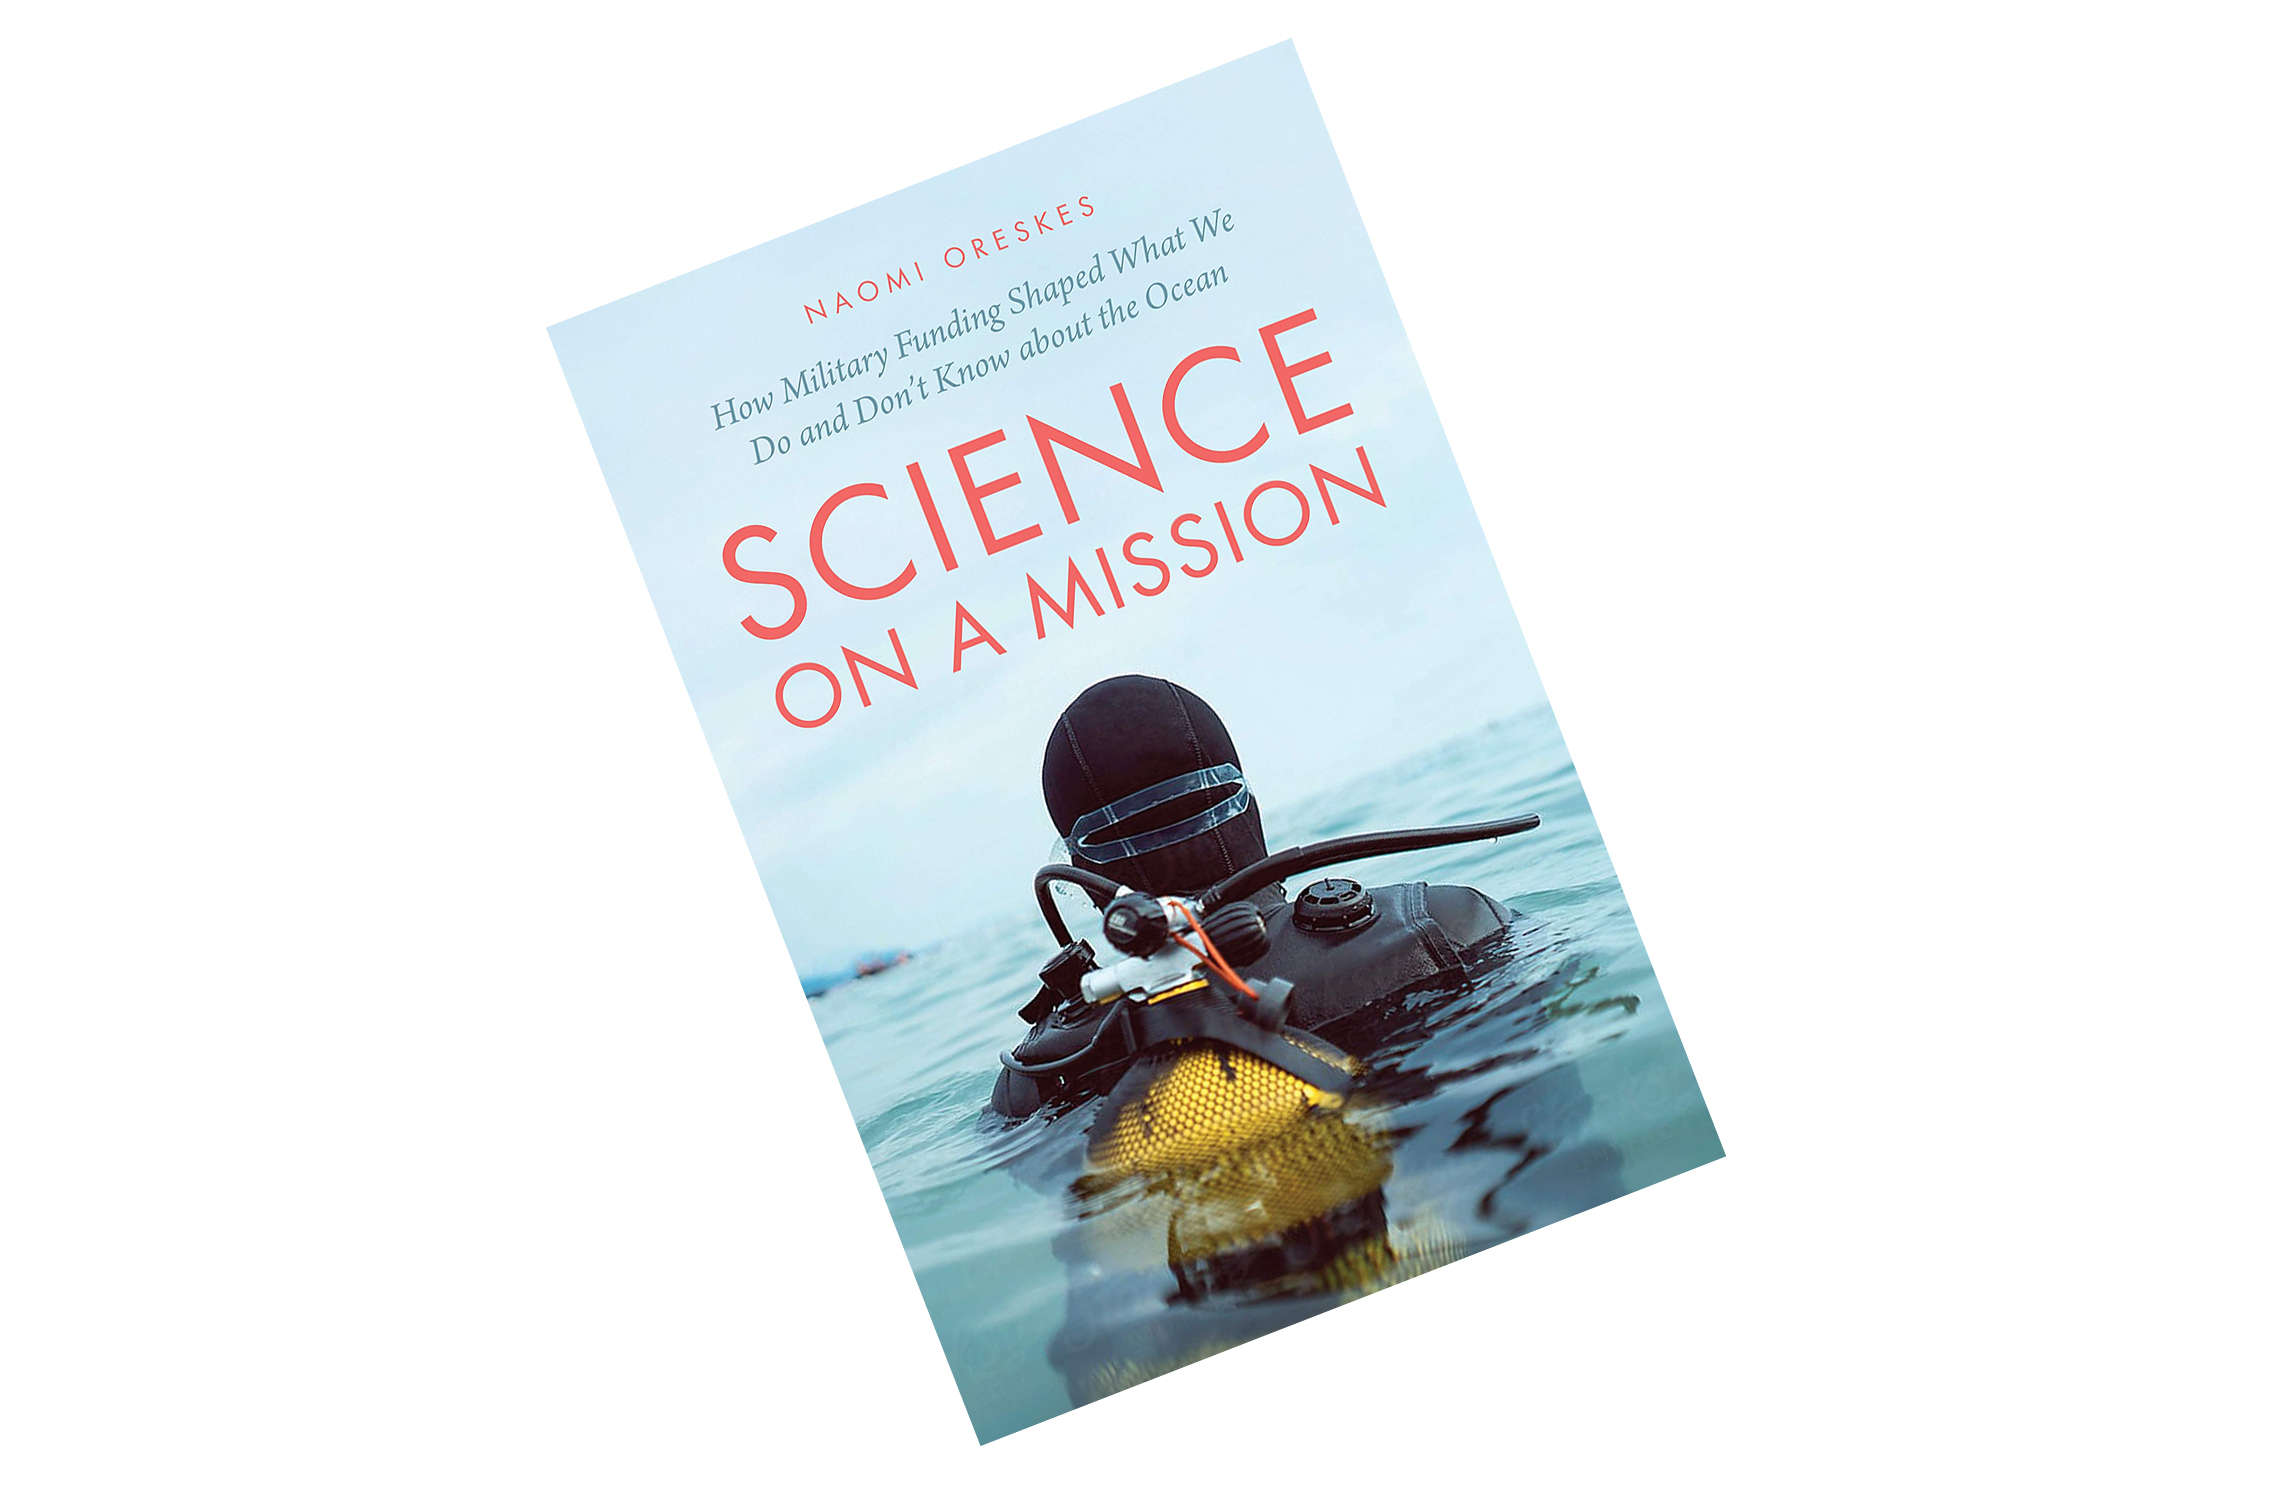 Naomi Oreskes: Science on a Mission: How Military Funding Shaped What We Do and Don’t Know about the Ocean. University of Chicago Press, 2021